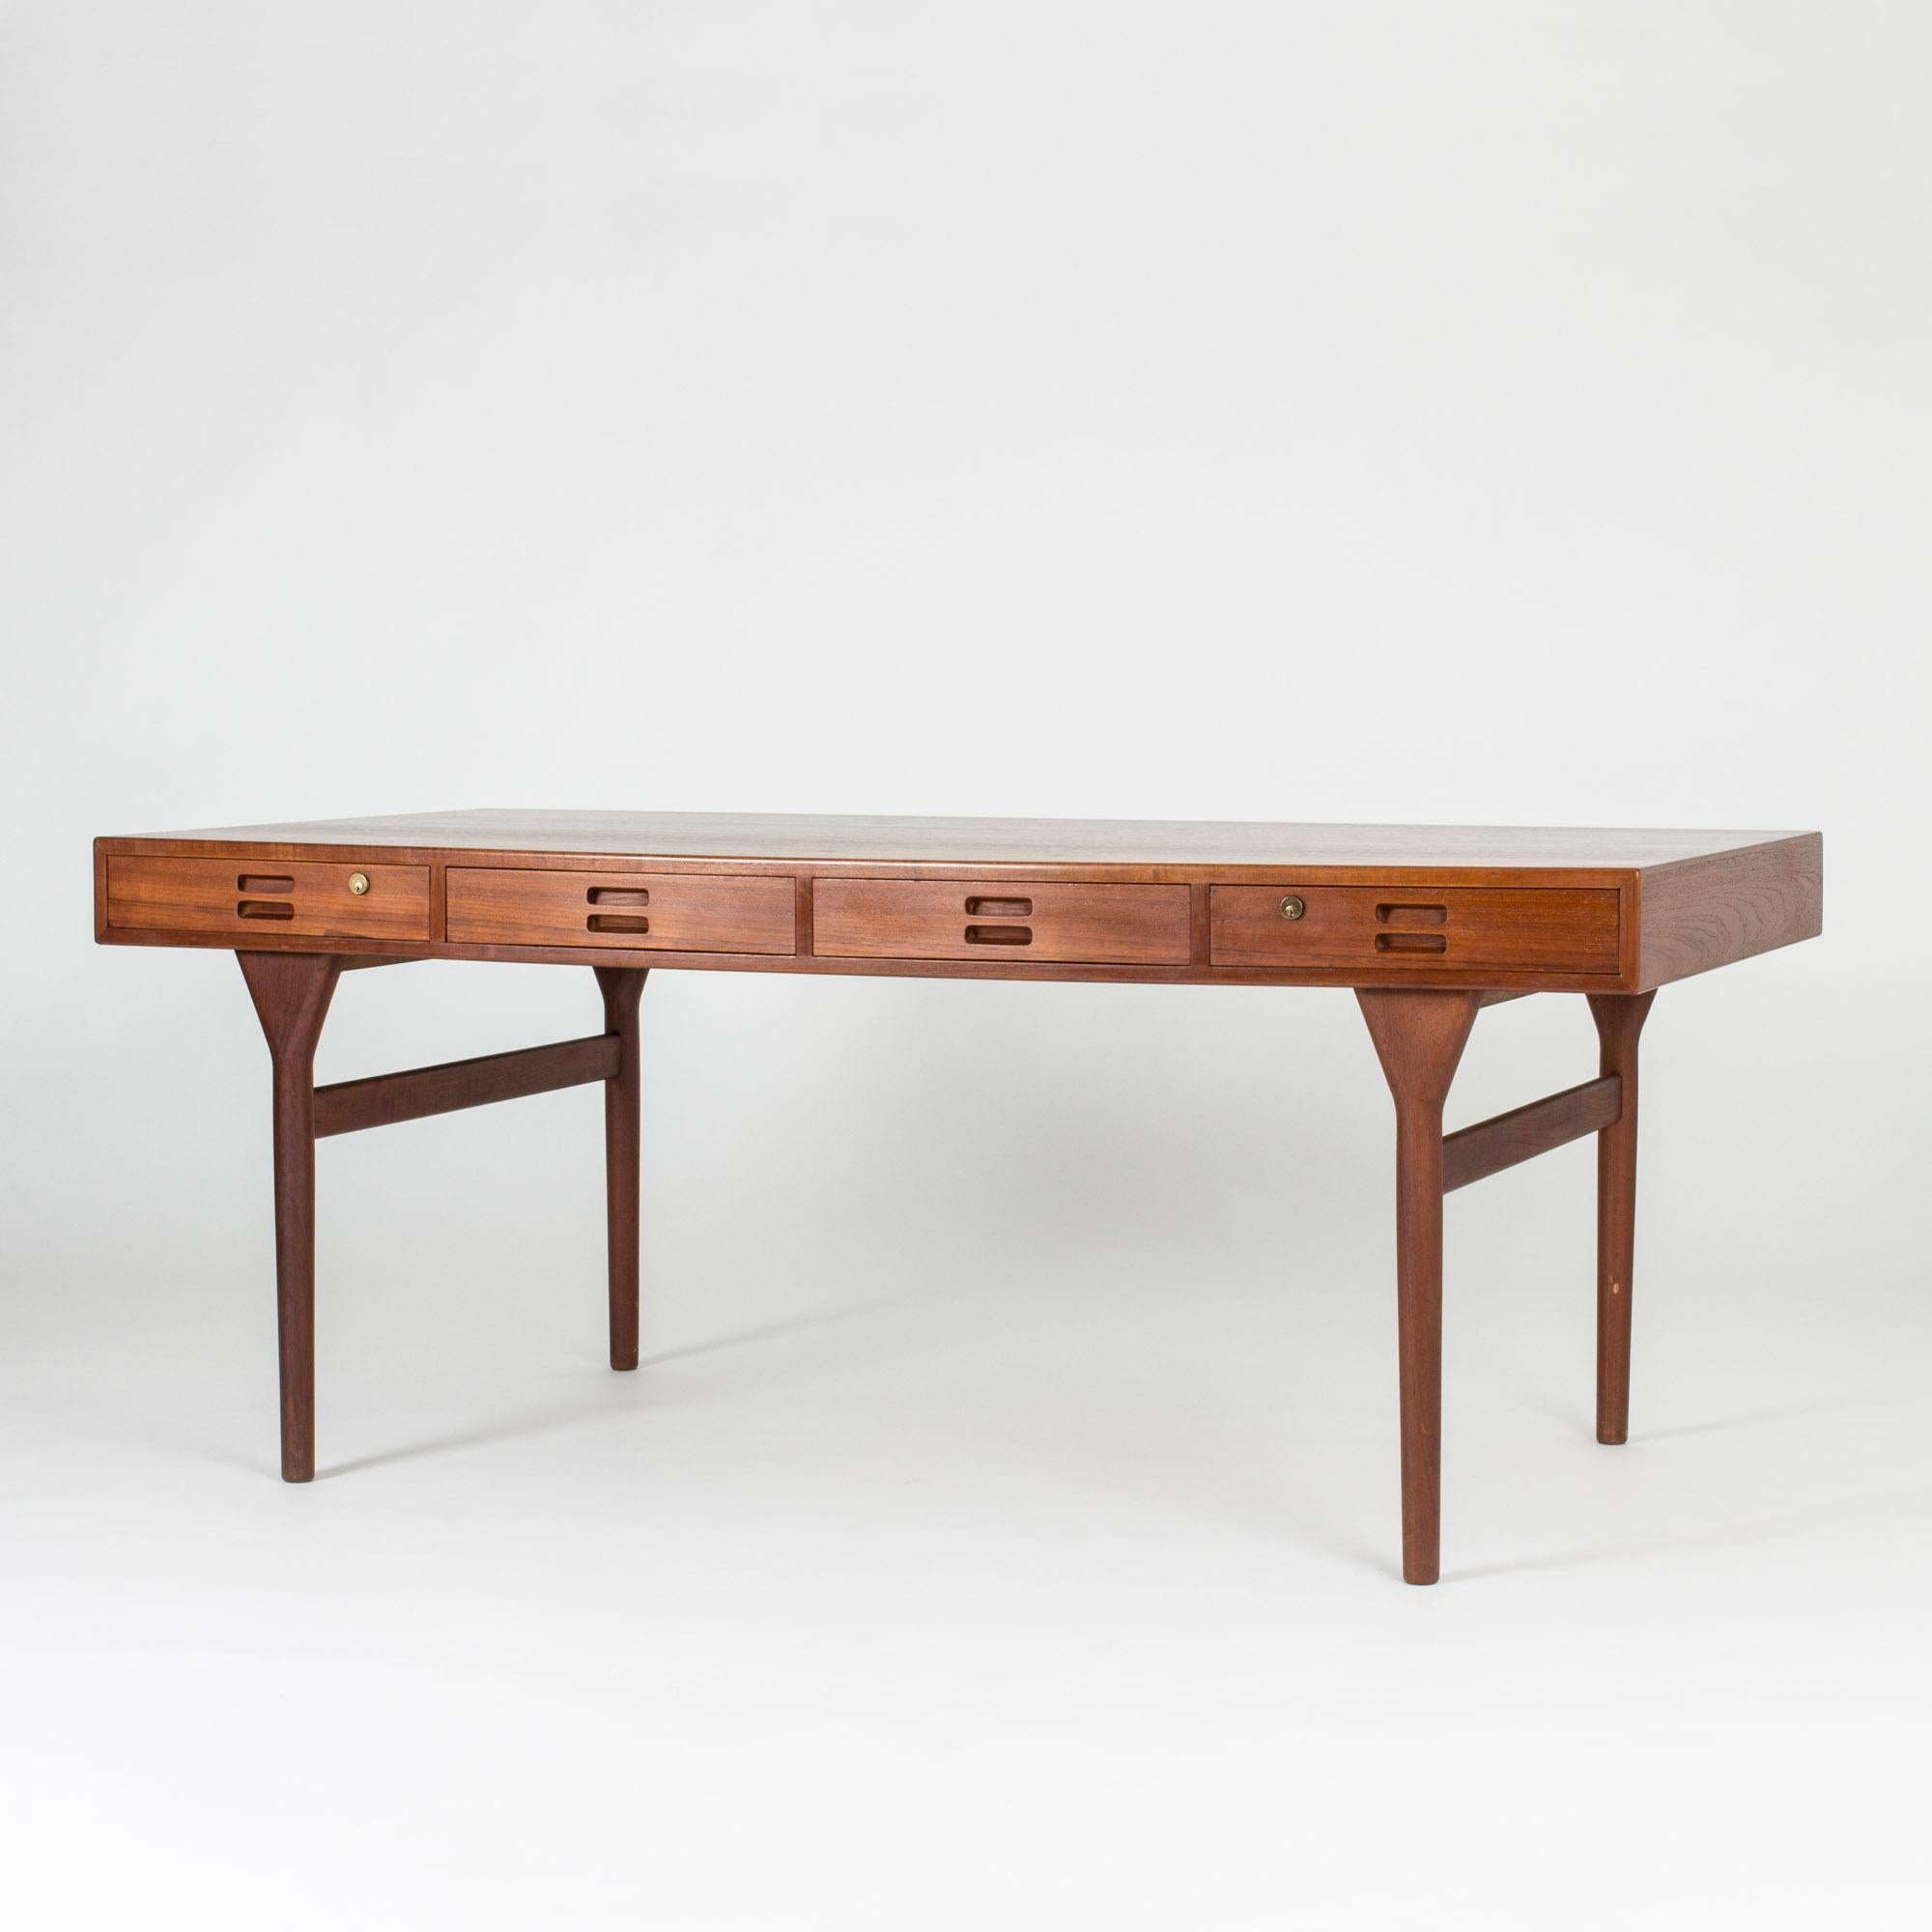 Striking desk by Nanna Ditzel, made in beautiful teak with simplistic lines and cool details. Amazing, minimalistic silhouette.